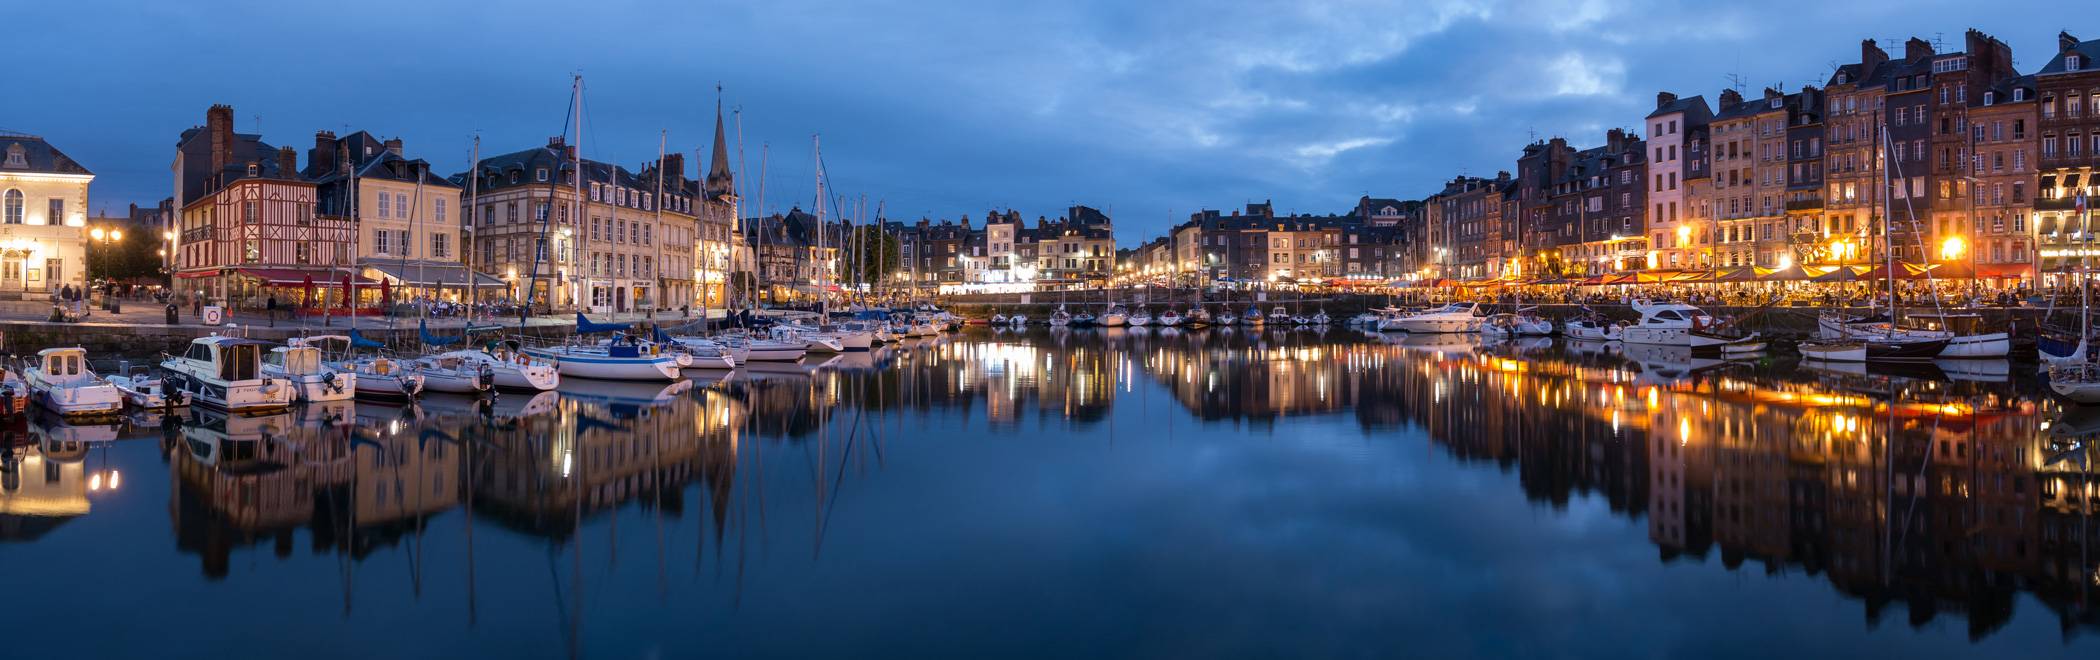 Honfleur Harbour by Gill Prince